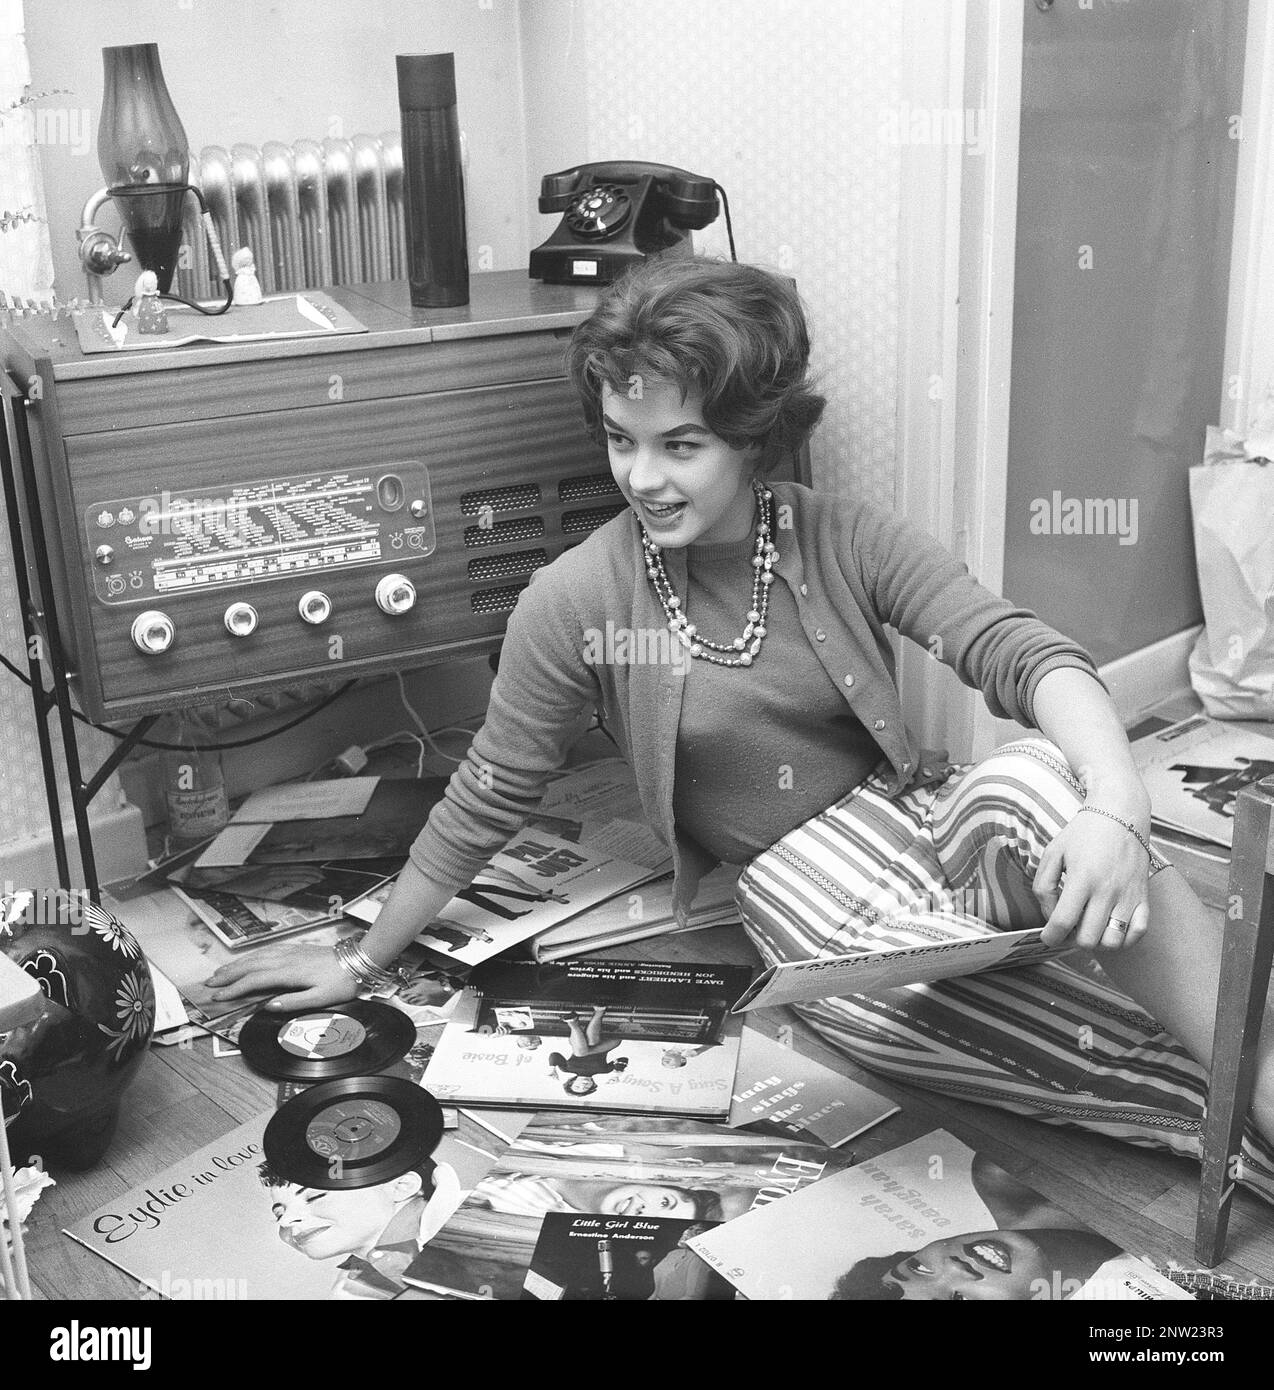 Radio listeners in the past. A woman is seen on the floor with records by popular singers and groups of the 1950s.The combined radio and record player is seen that was a popular item at this time, often a nice piece of furniture in itself, usually in a wooden case. She is swedish singer Lill-Babs Svensson. Sweden 1958 ref BV21-3 Stock Photo